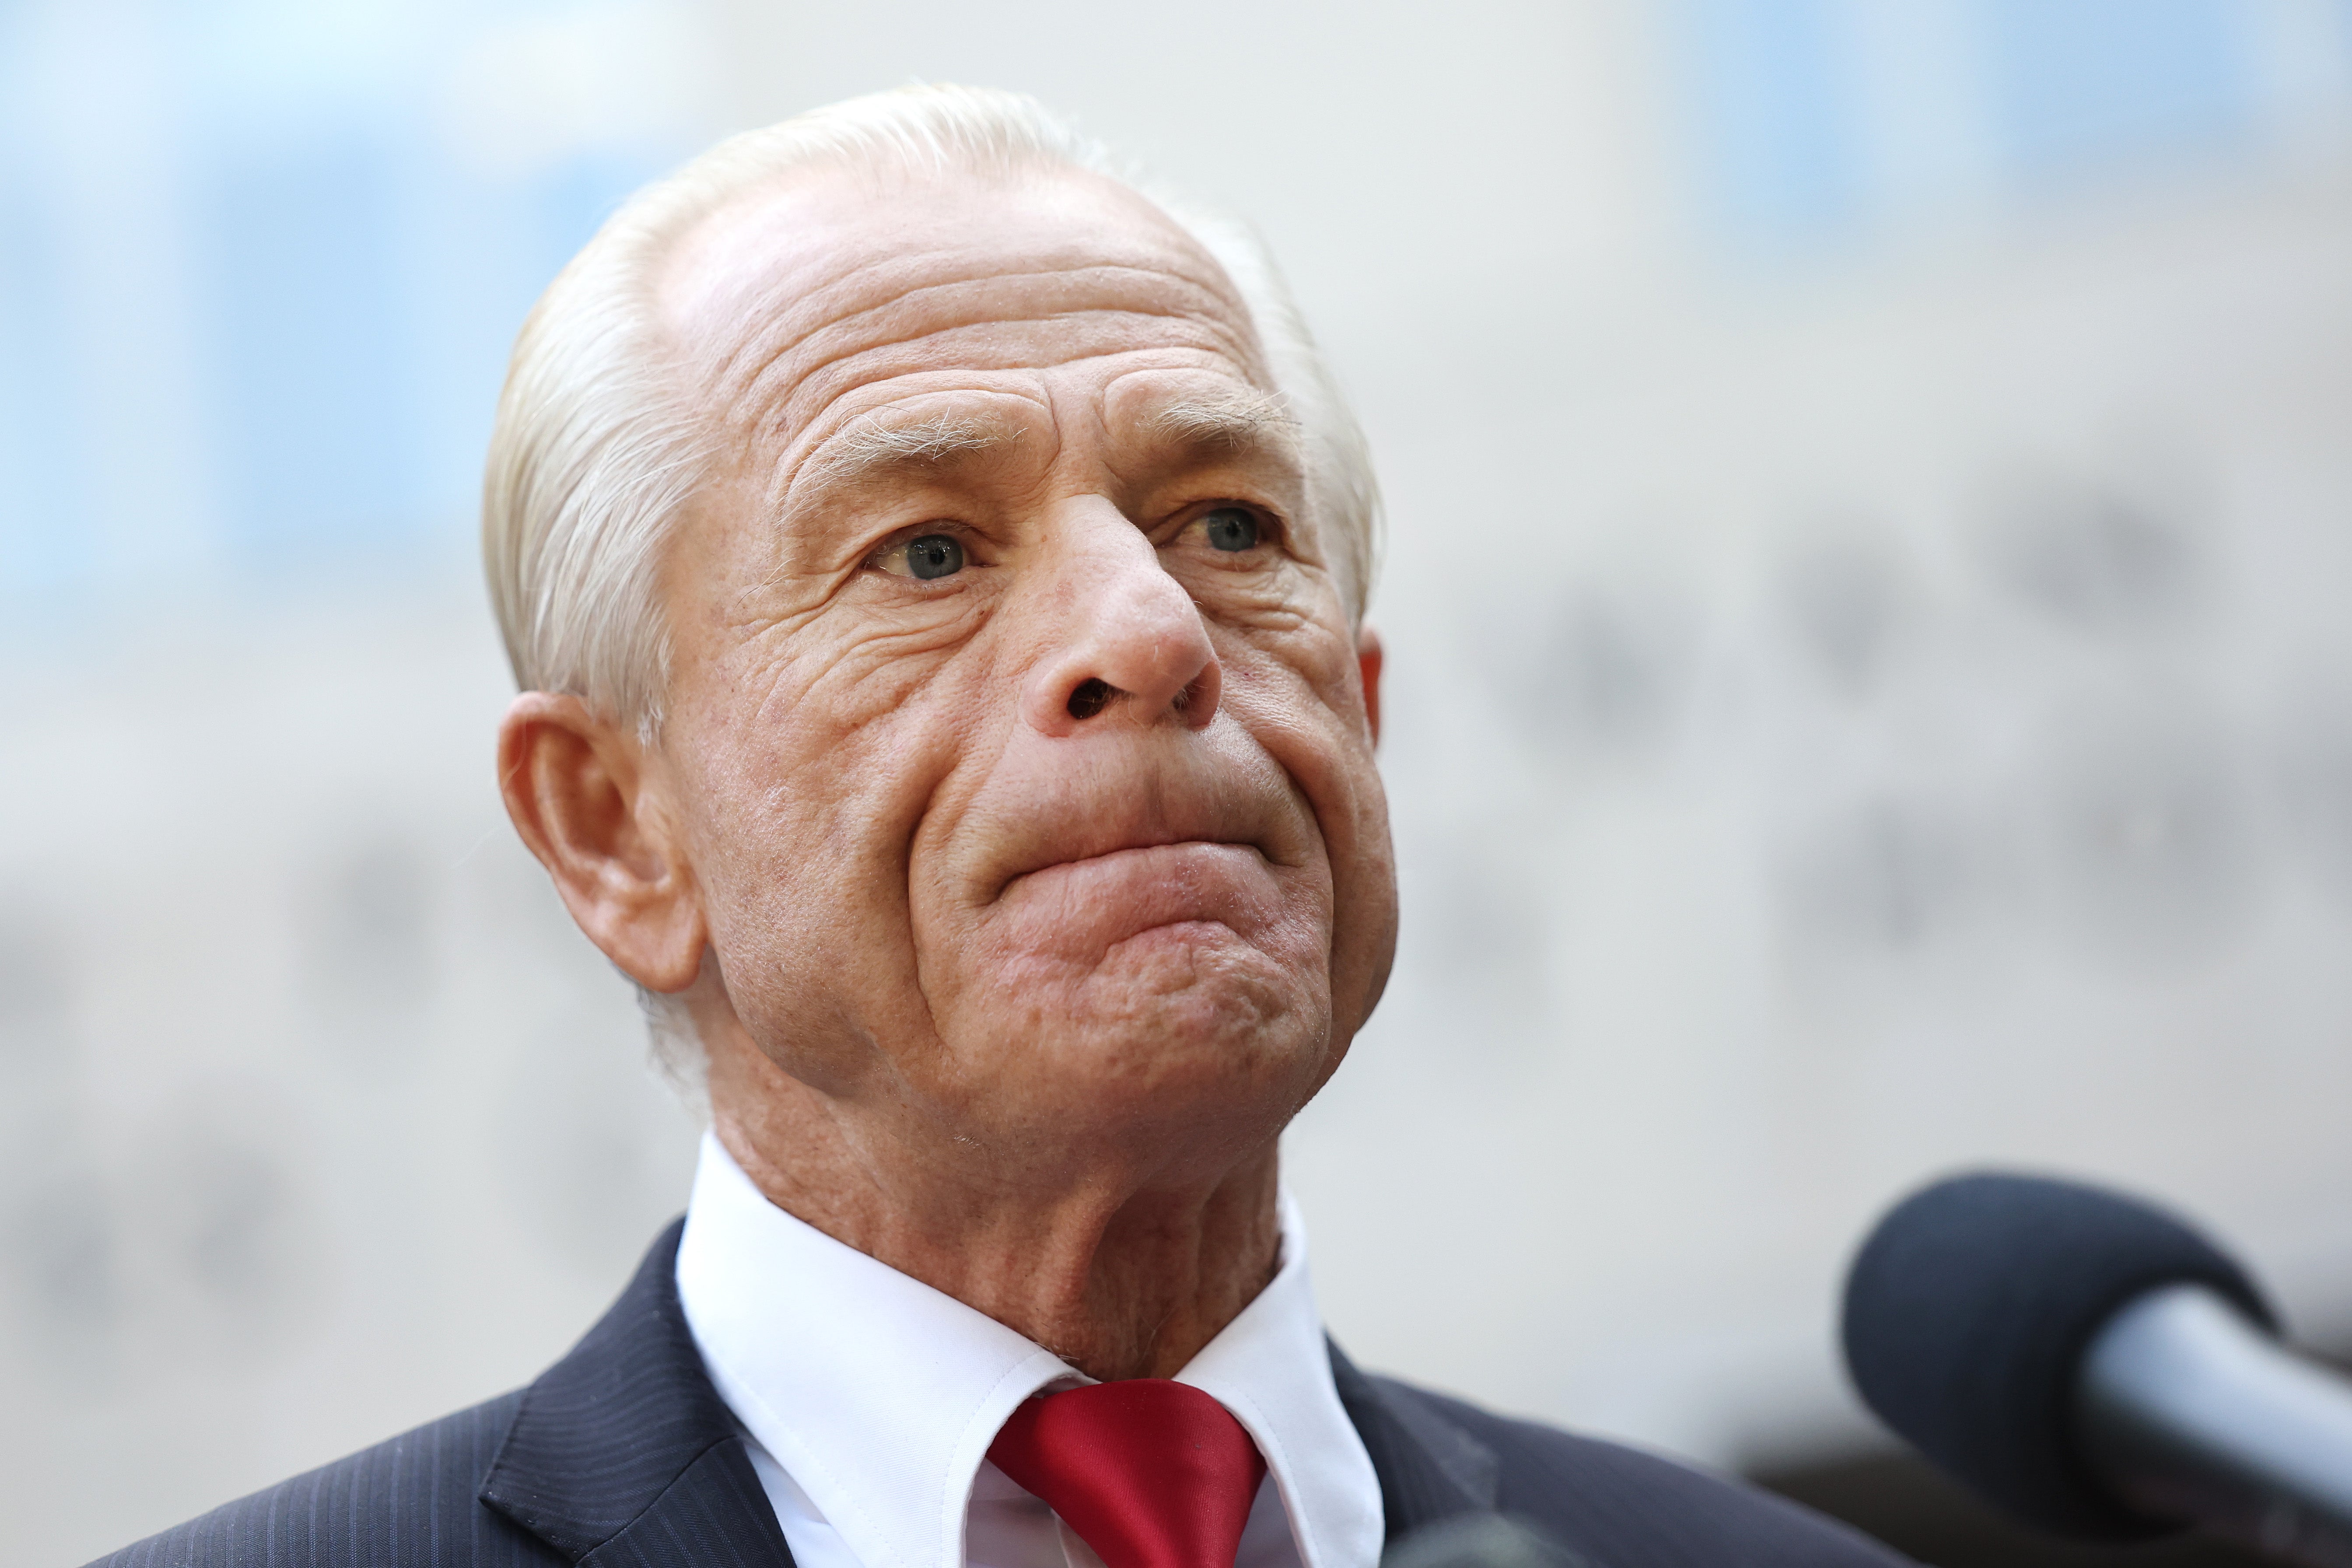 Peter Navarro, an advisor to former U.S. President Donald Trump, speaks to reporters as he arrives at the E. Barrett Prettyman Courthouse on September 07, 2023 in Washington, DC. The jury is expected to begin deliberating today in Navarro's contempt of Congress case for failing to comply with a congressional subpoena from the